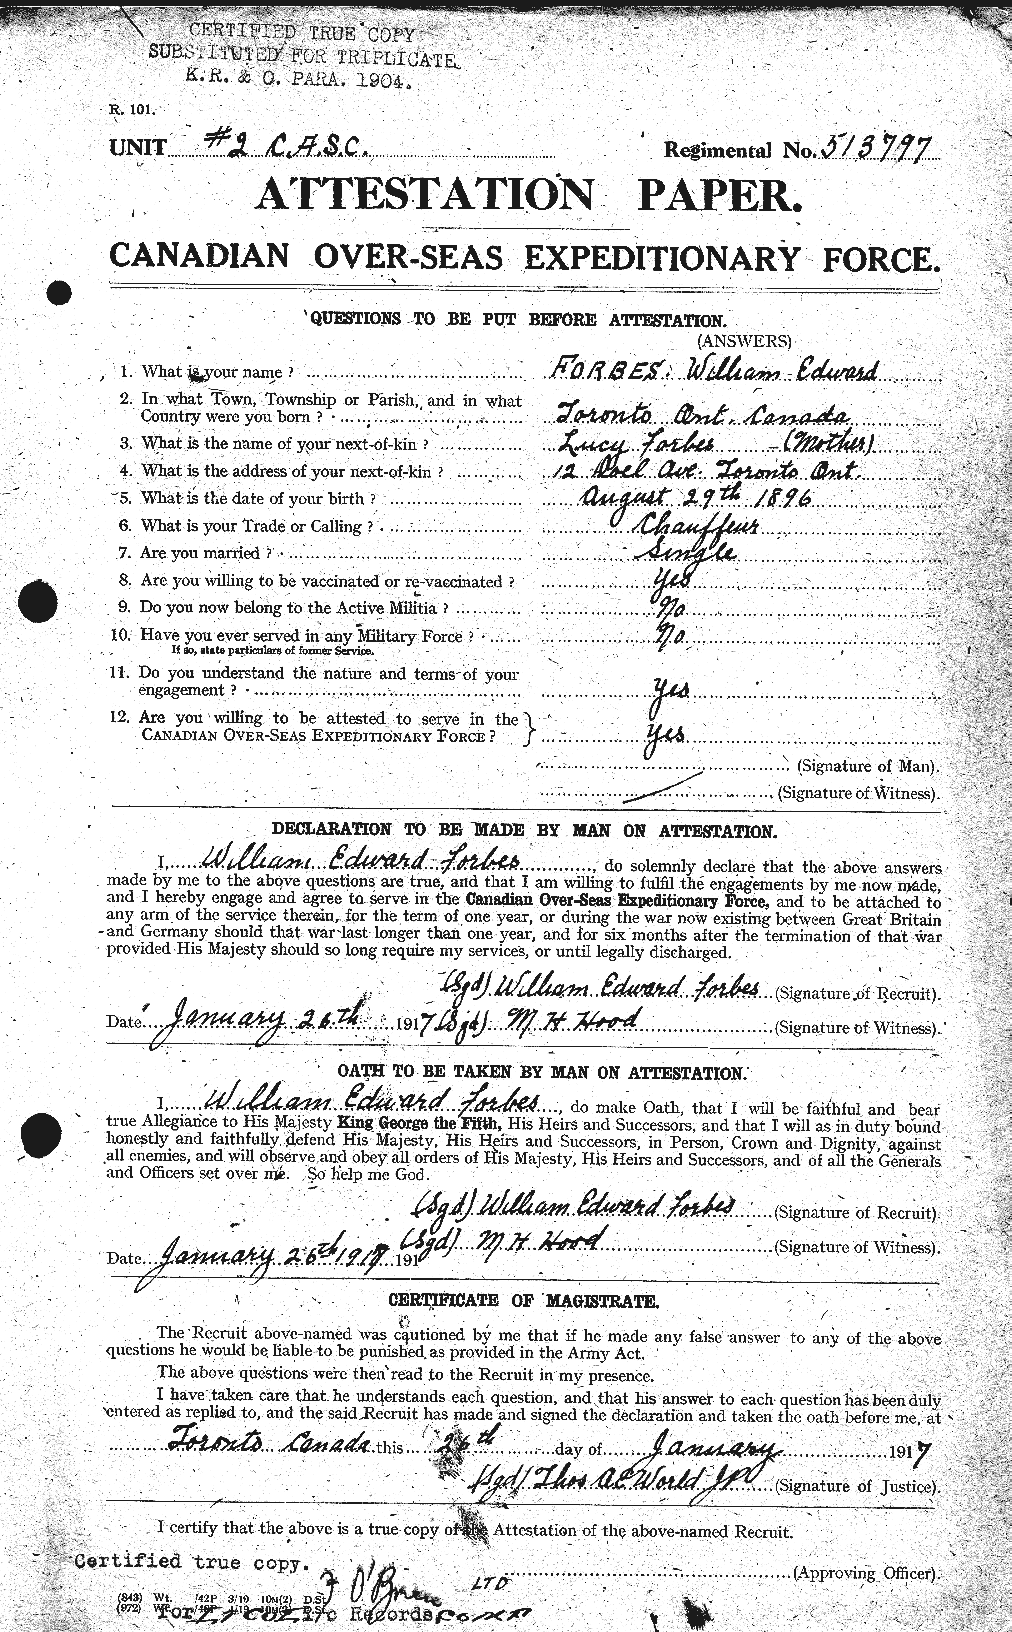 Personnel Records of the First World War - CEF 331827a